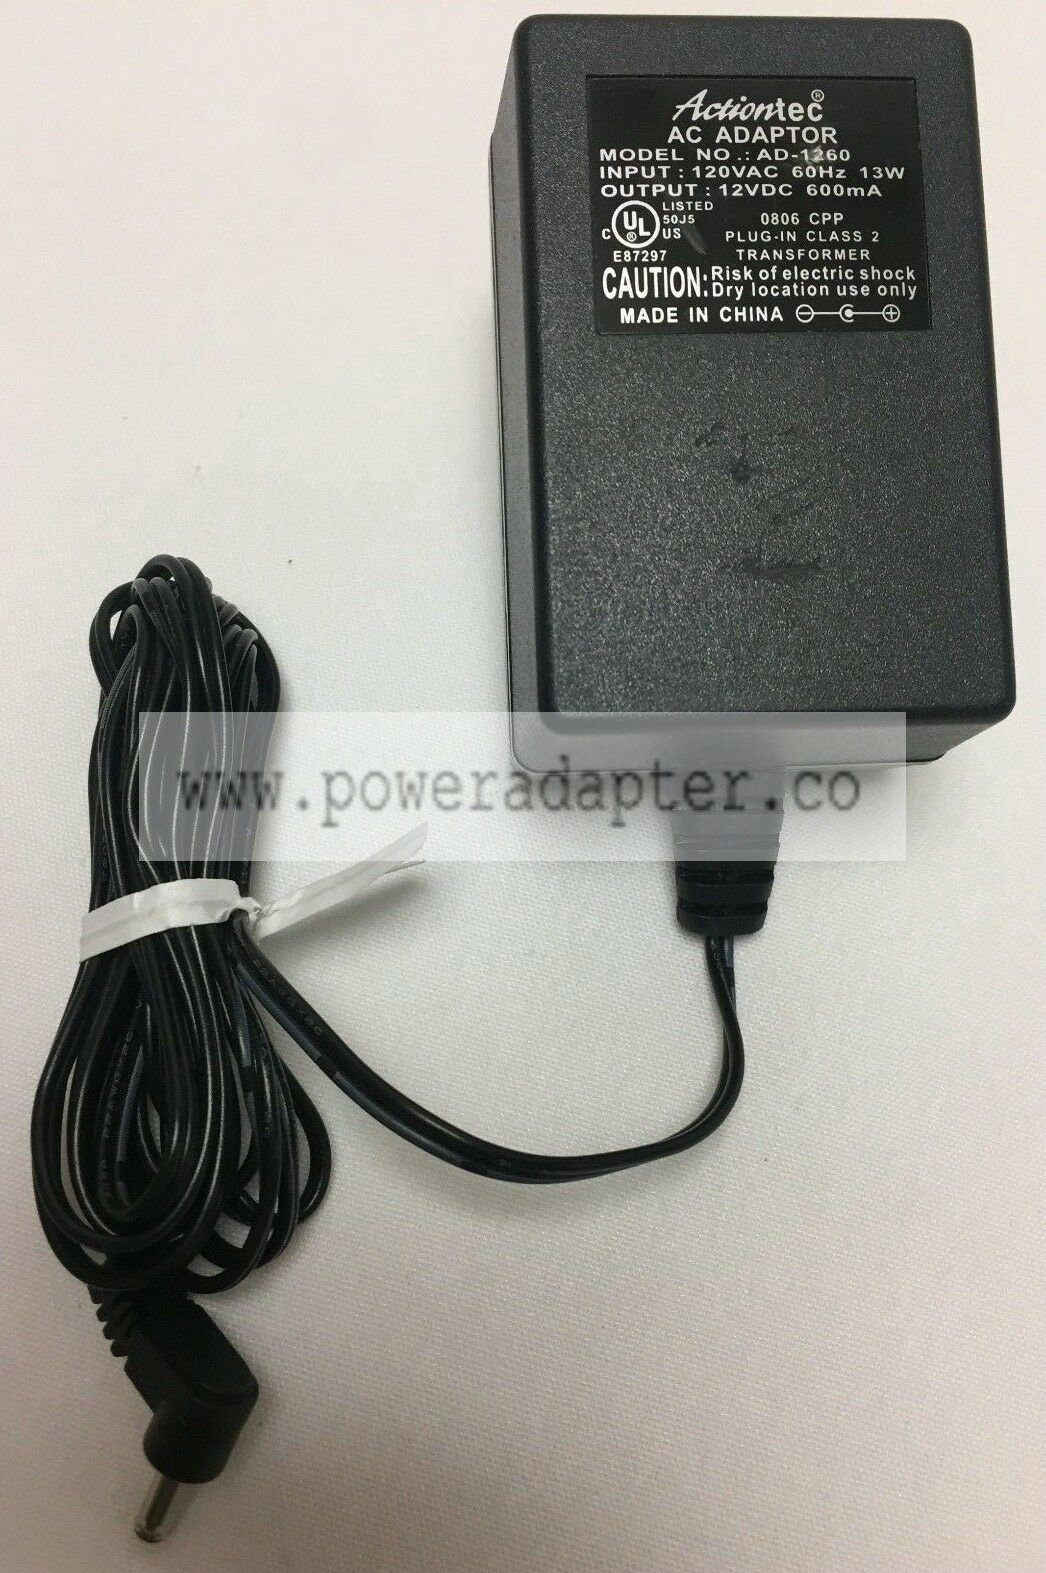 Actiontec AC Adapter Model NO: AD-1260 Plug-In Class 2 Transformer Output Voltage(s): 12V, 12VDC 600mA Type: AC/Stan